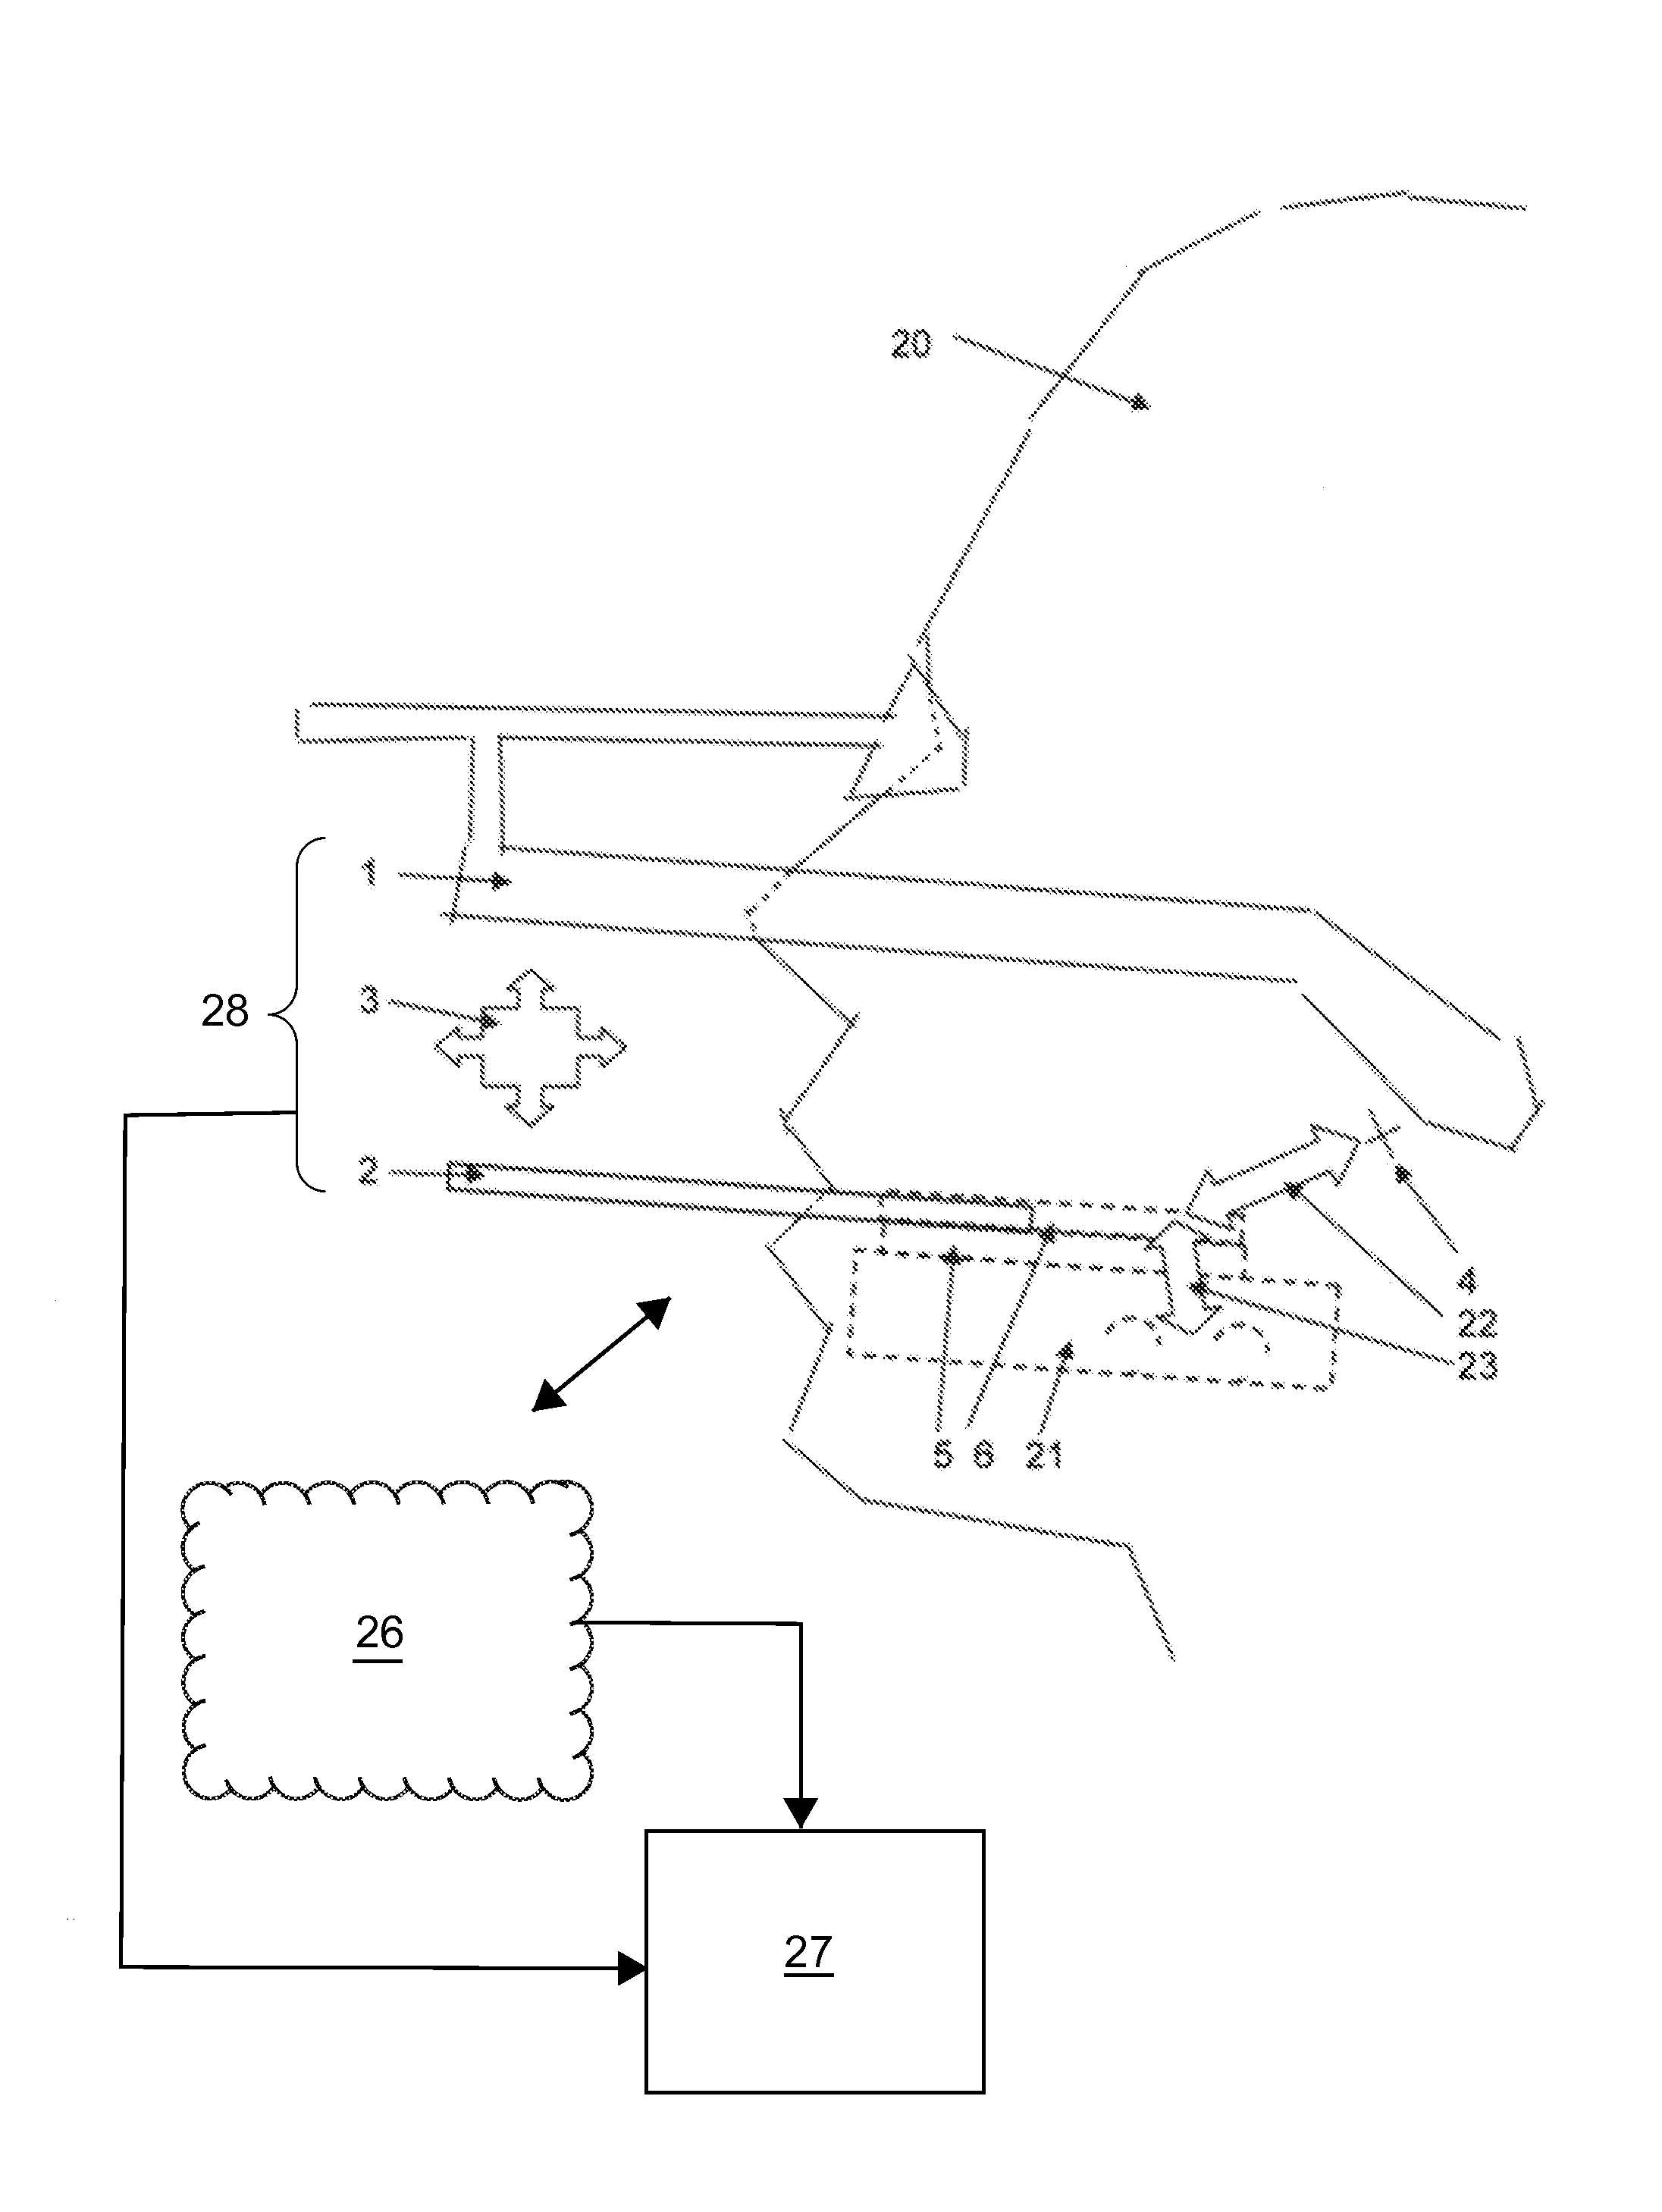 Device and method for registering 3D measurement data of jaw models in a basal skull-referenced coordinate system with the aid of a computer-supported registration system